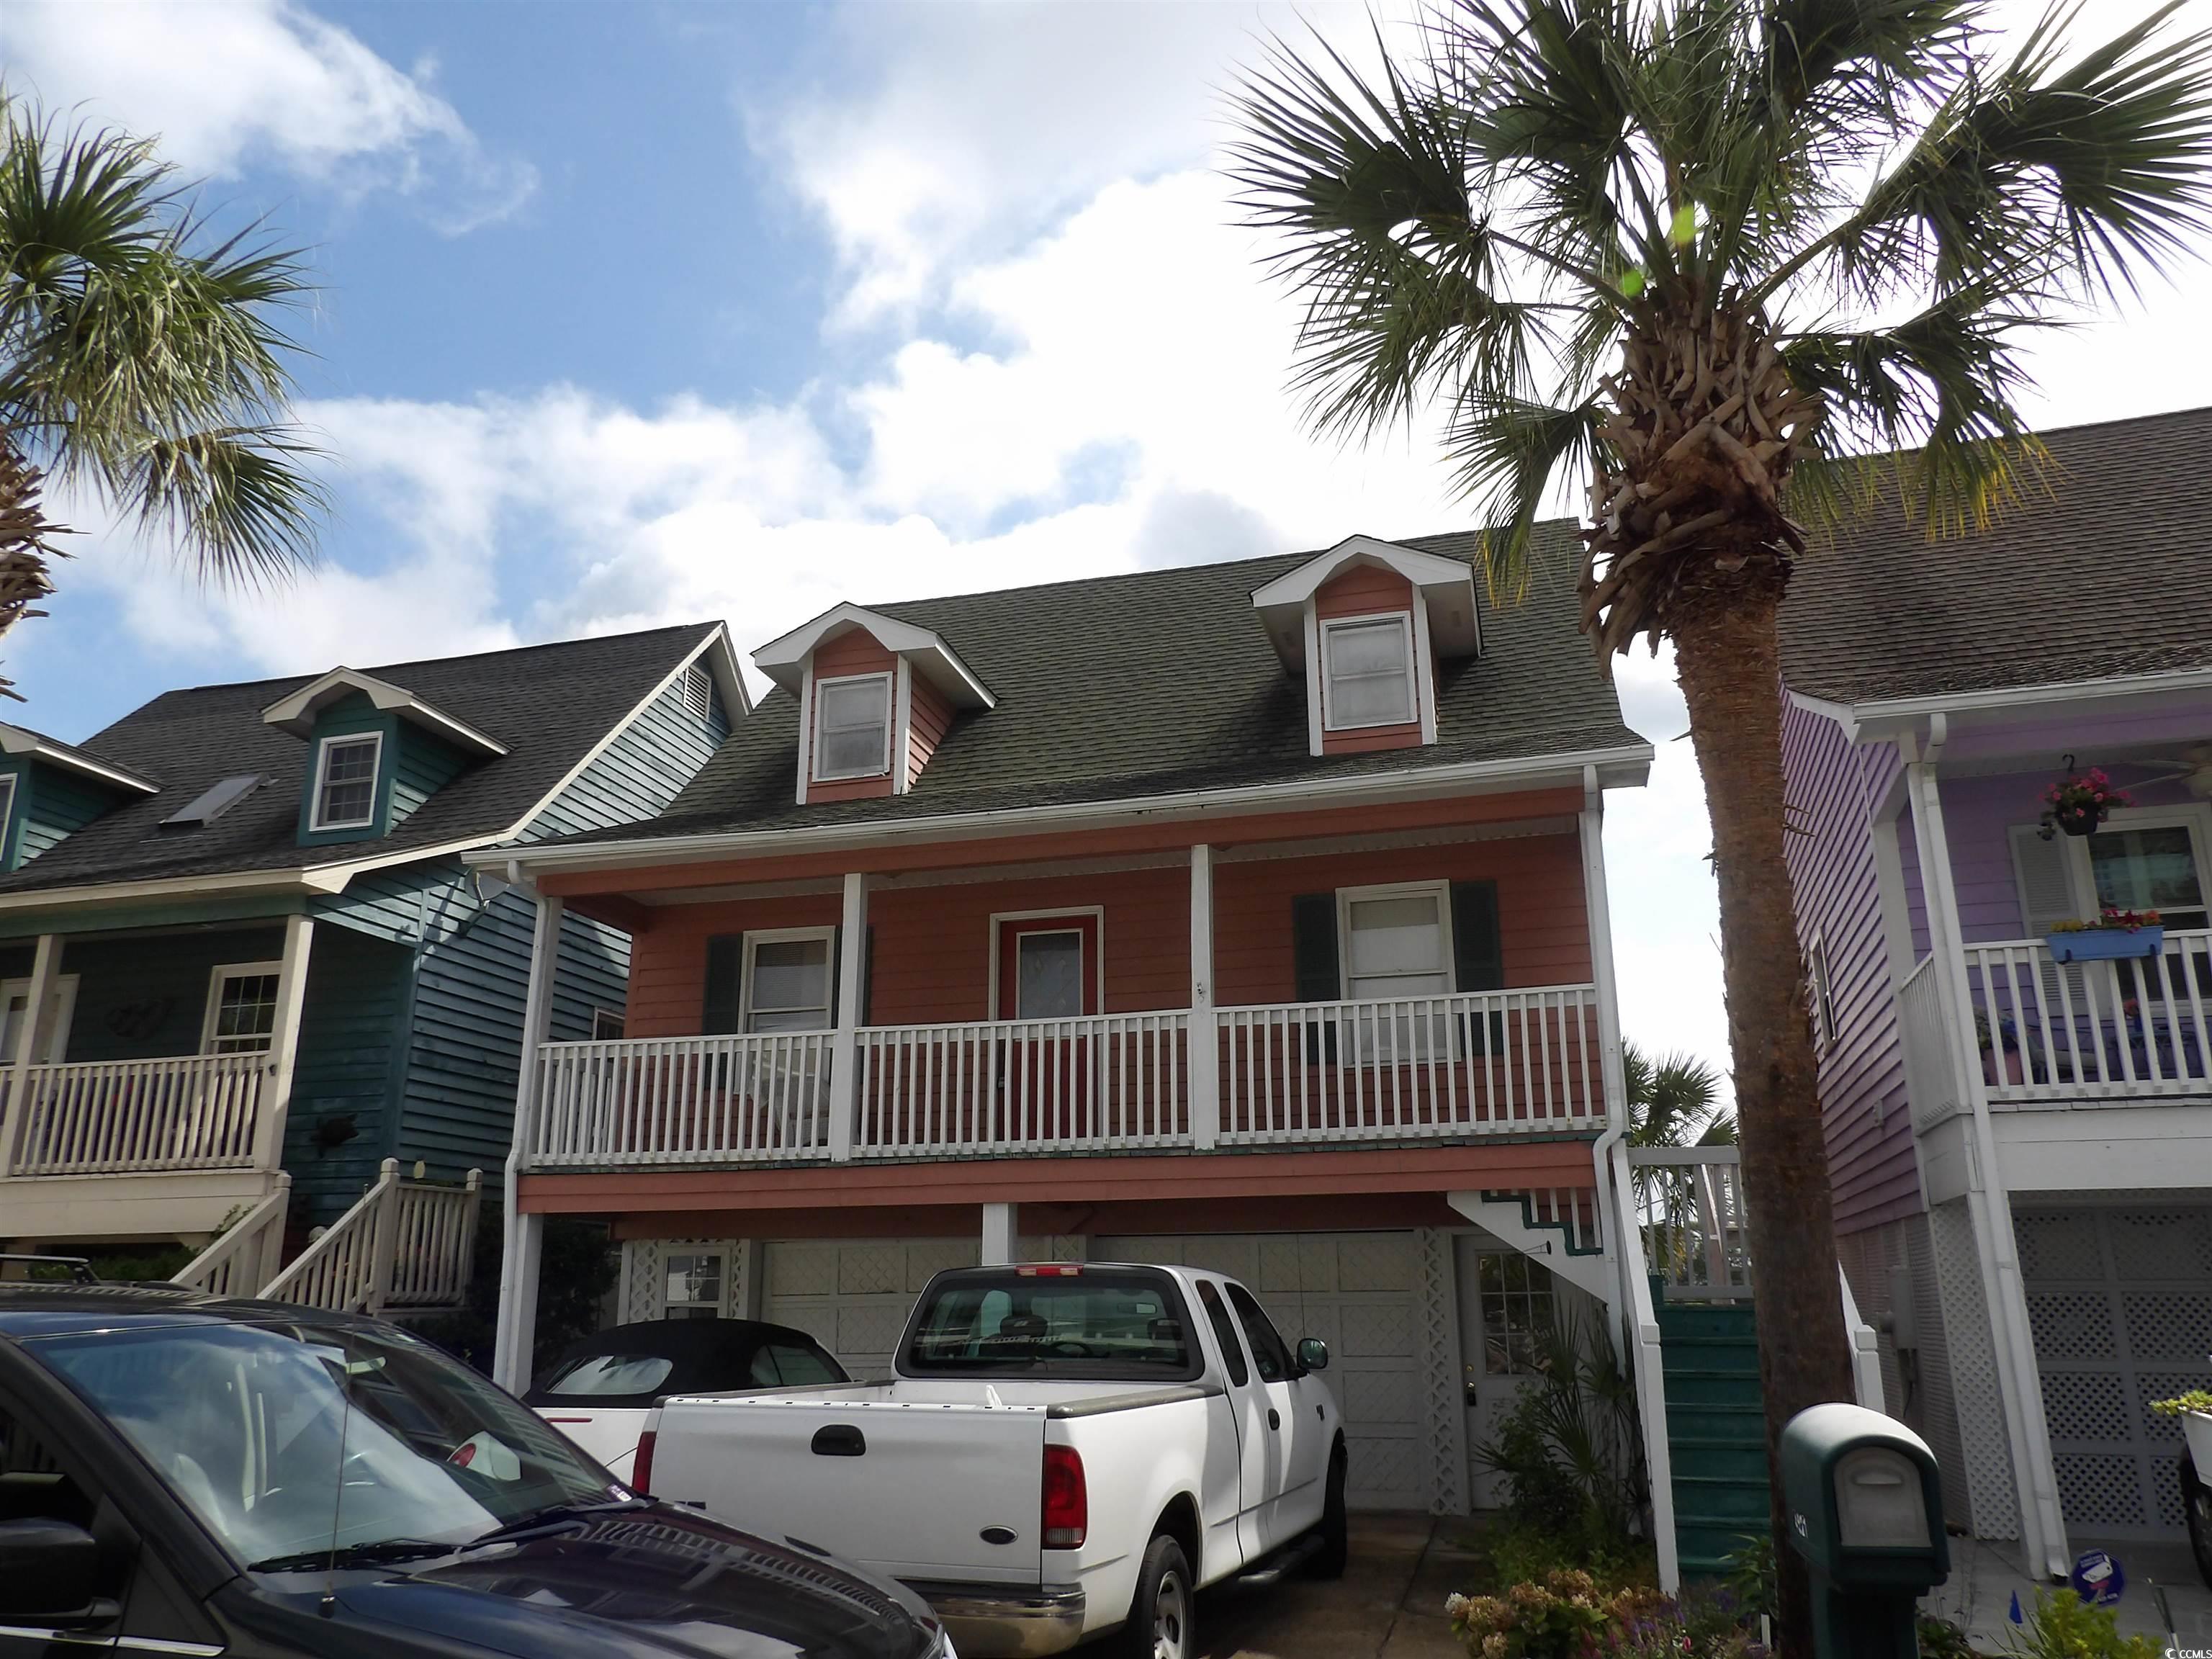 bank has accepted an offer as of sept. 5th, 2023.  pending contract.  located in crystal pointe, an intracoastal waterway gated community.   dock and boat ramp.  sit on all 3 decks and see the wonderful views of the intracoastal.  garage has flooded in the past and has some water damage in house.  beautiful location.